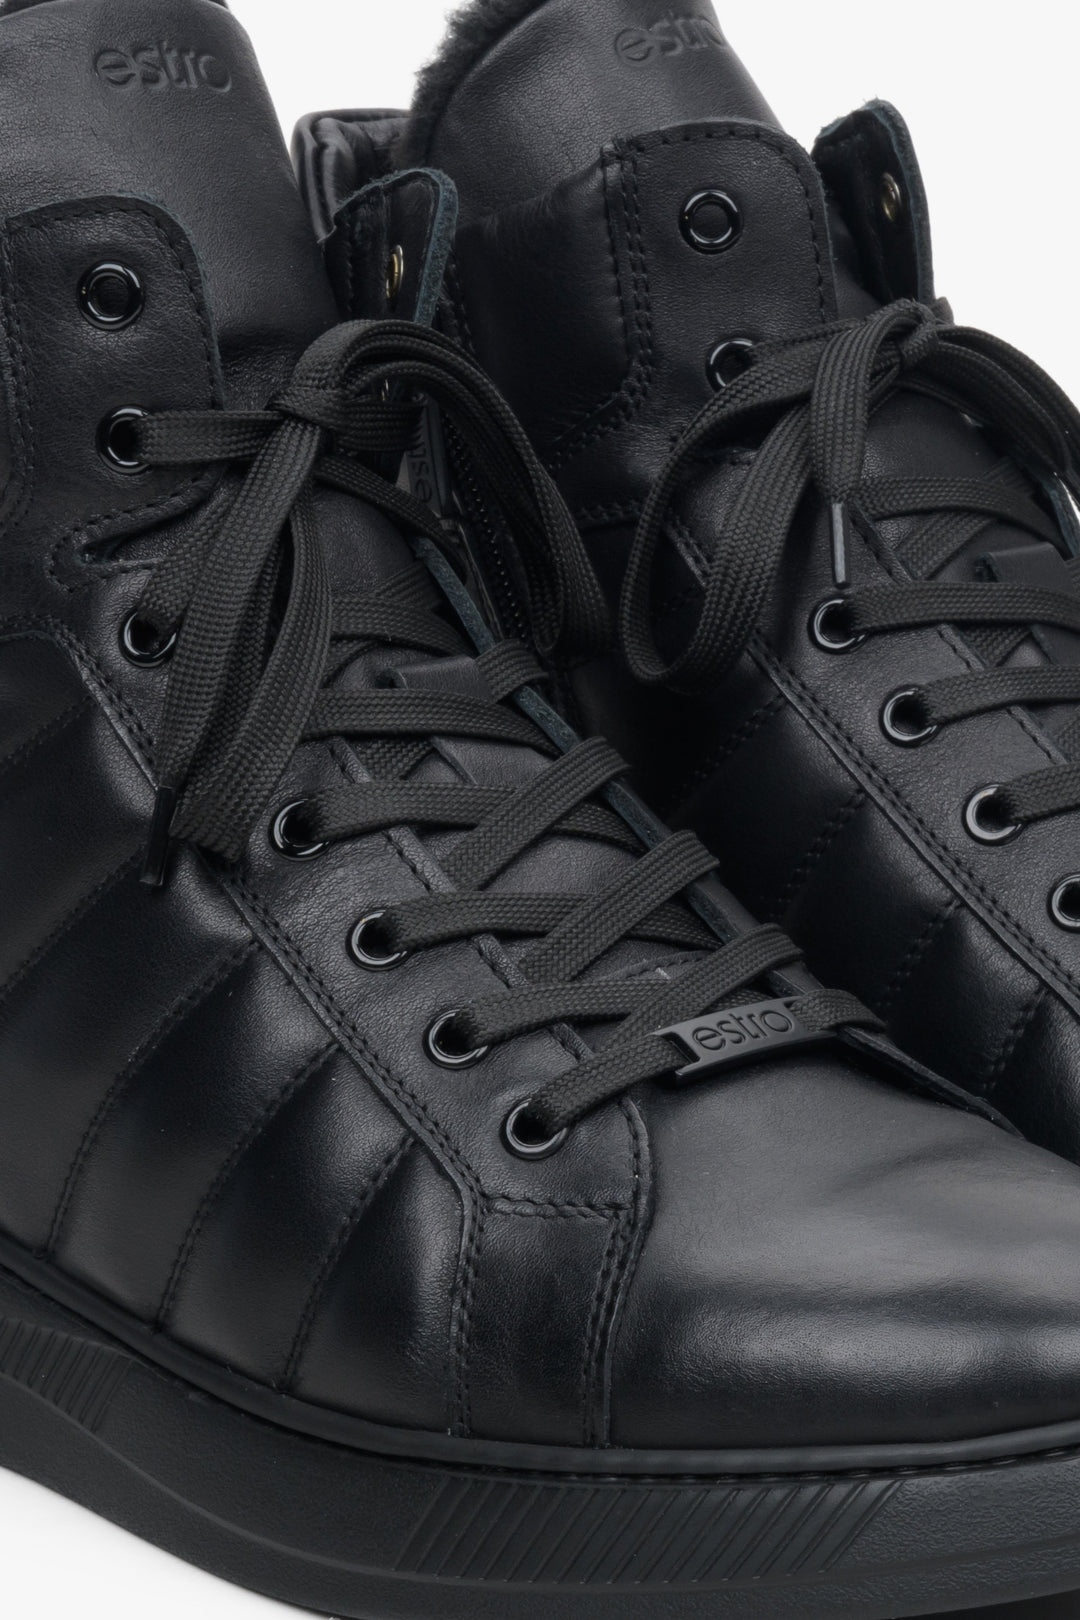 Men's black leather boots by Estro - close-up of the lacing system.